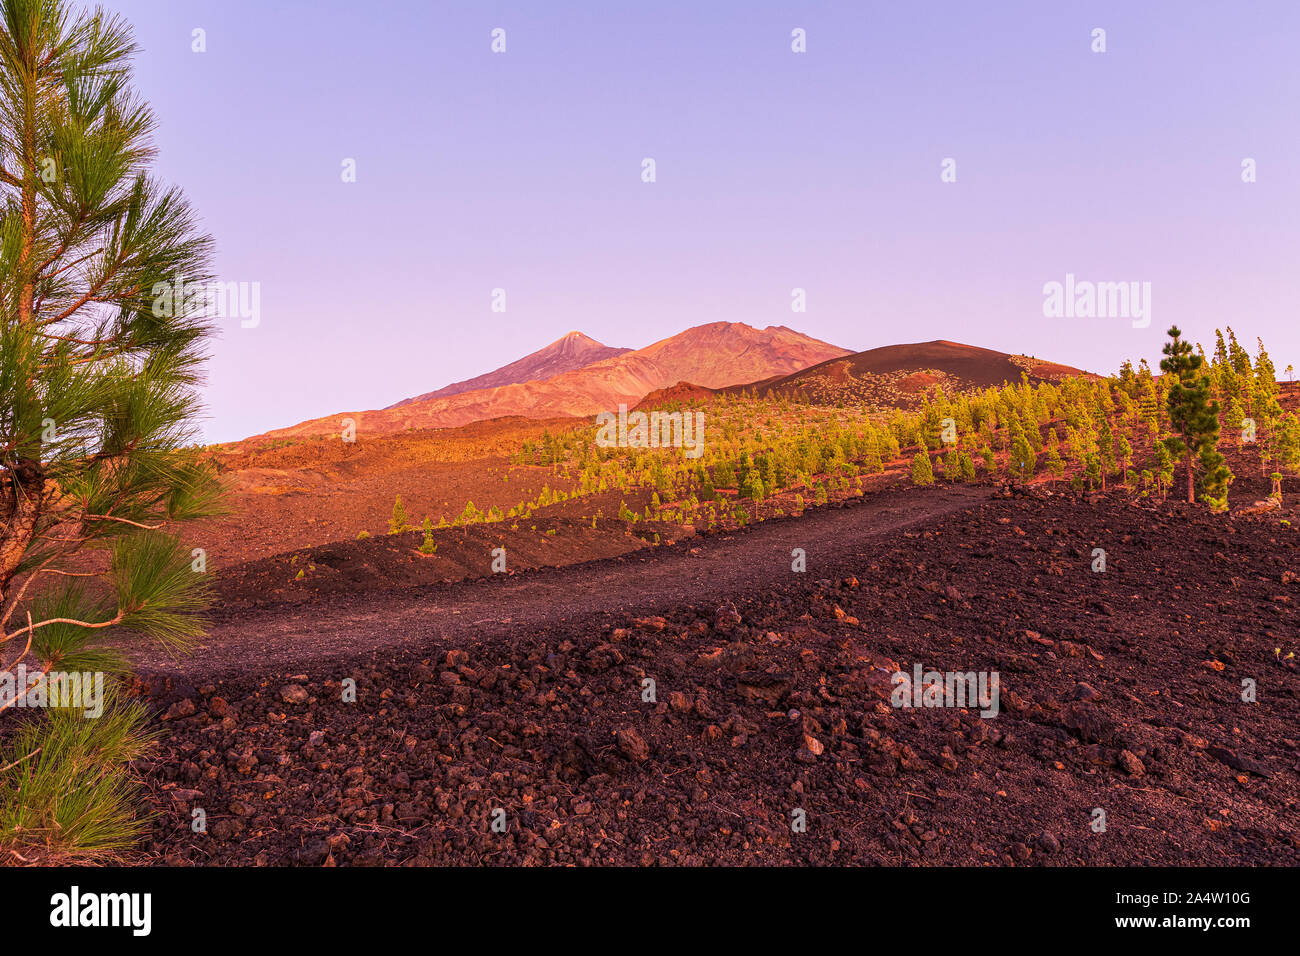 Teide volcano and the Pico Viejo, Old peak glow red in the twilight after sunset viewed from Samara mountain, Tenerife, Canary Islands, Spain Stock Photo